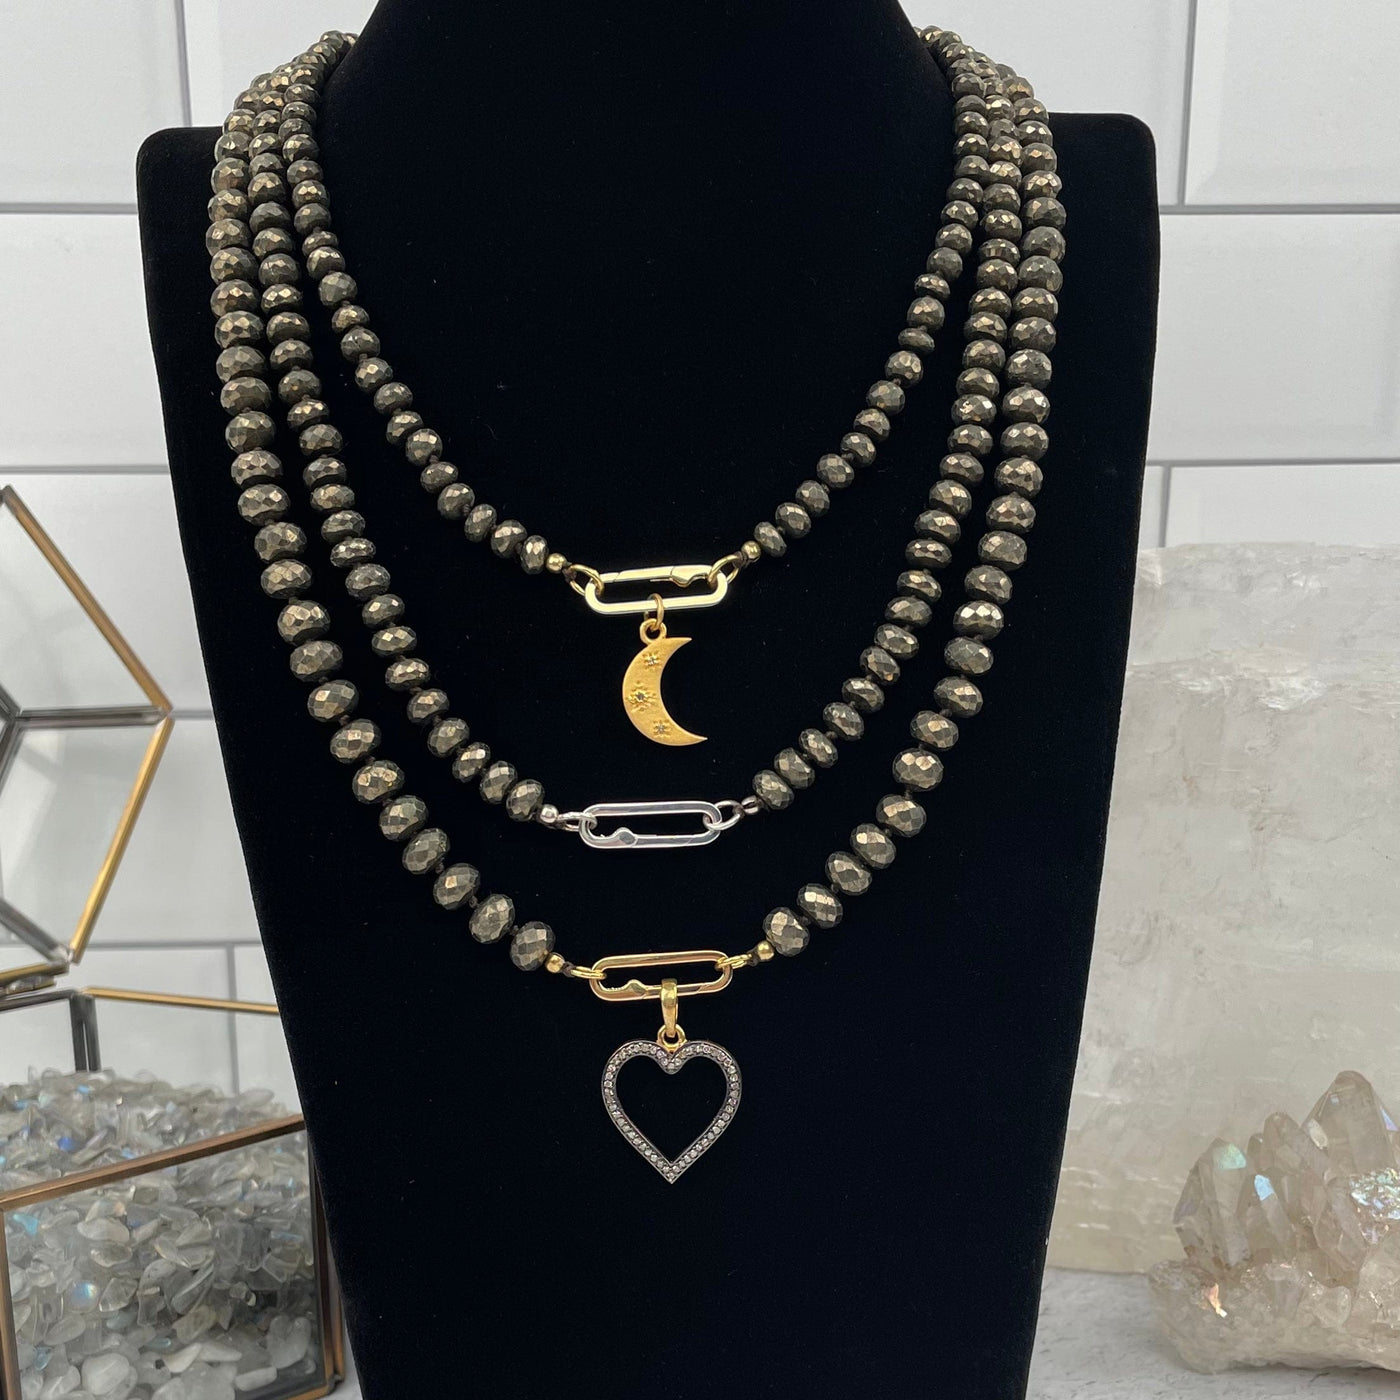 Faceted Pyrite Candy Necklaces come with a gold clasp or silver clasp 